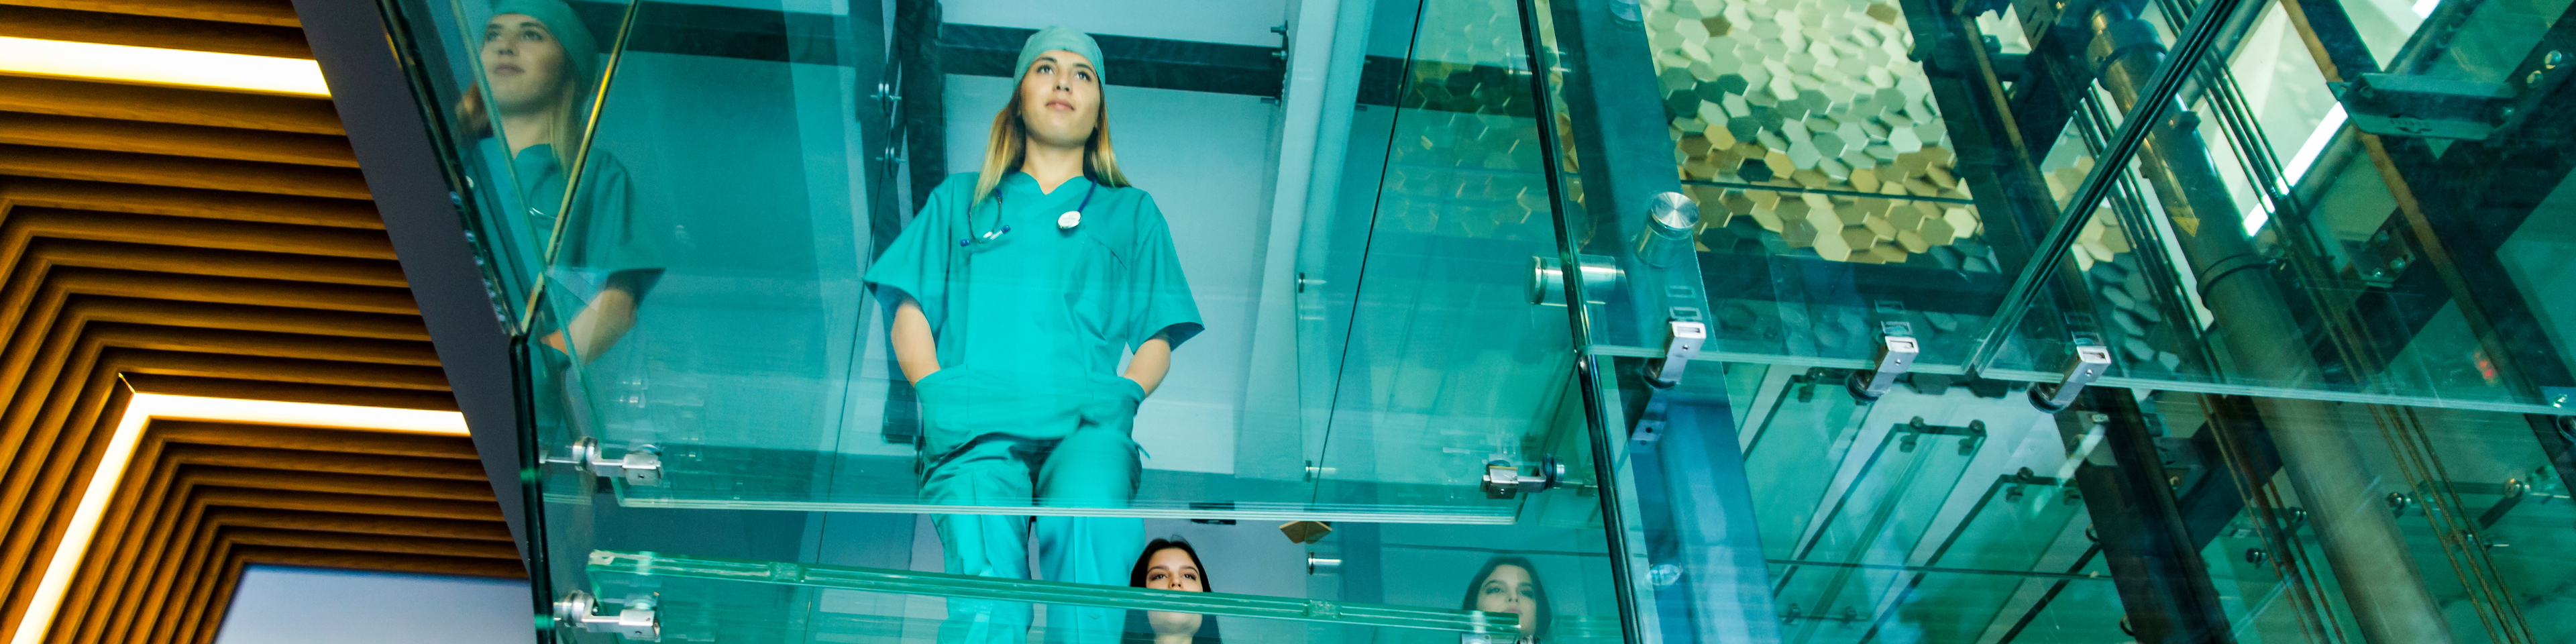 Group of nurses walking up glass stairs in hospital